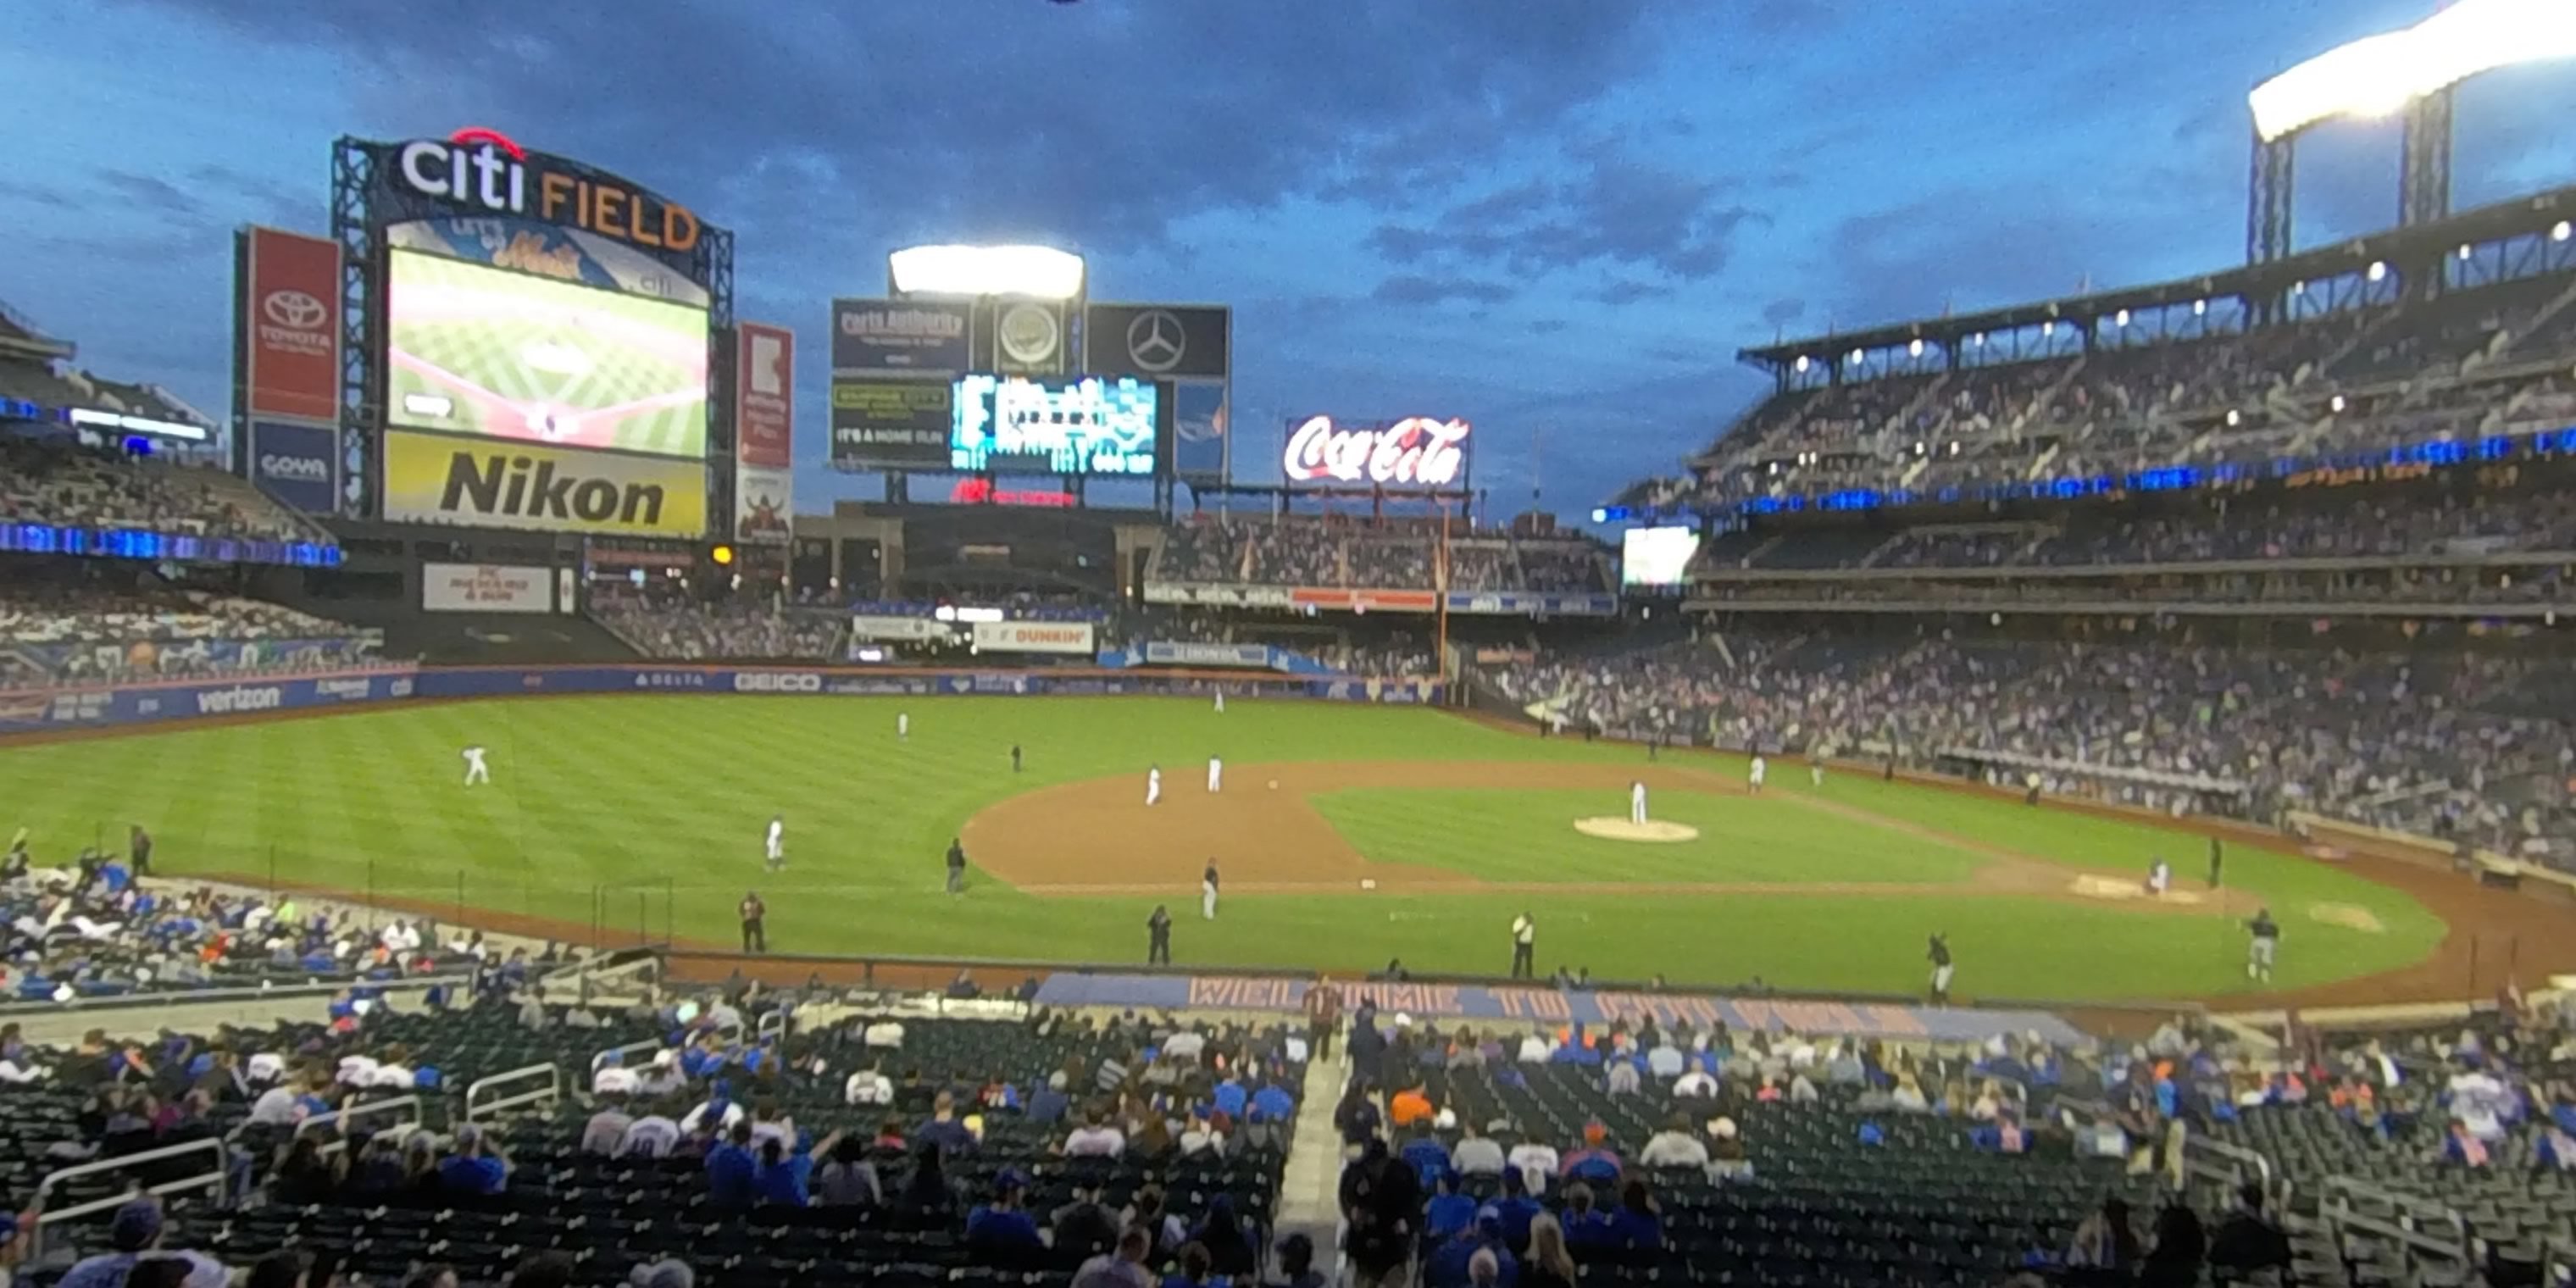 section 122 panoramic seat view  - citi field